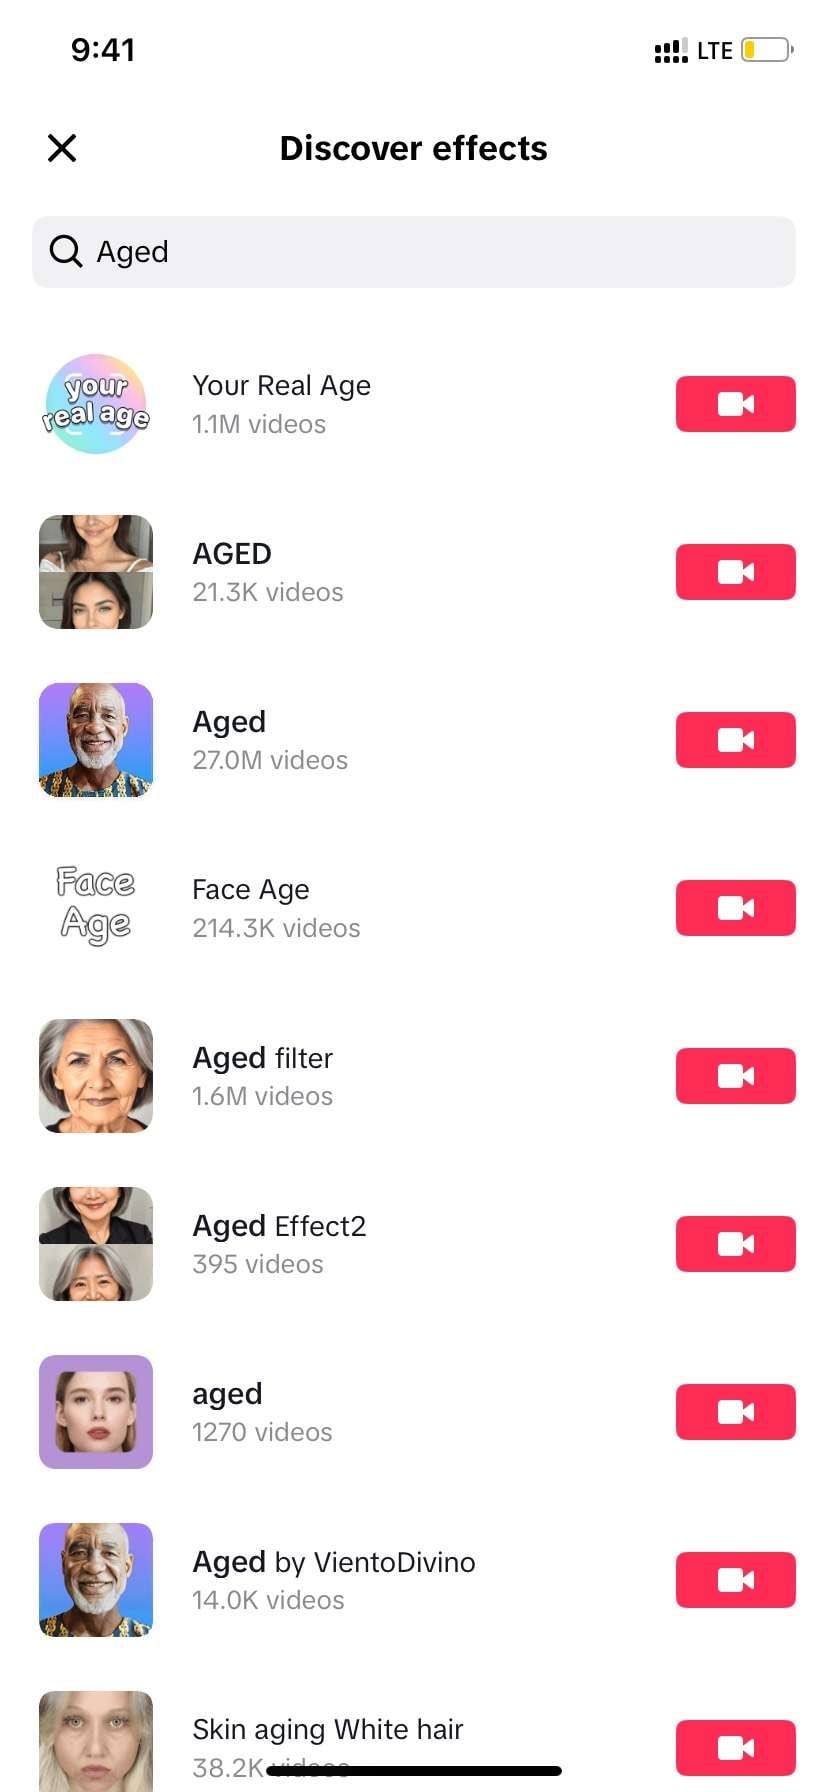 search for the aged filter.